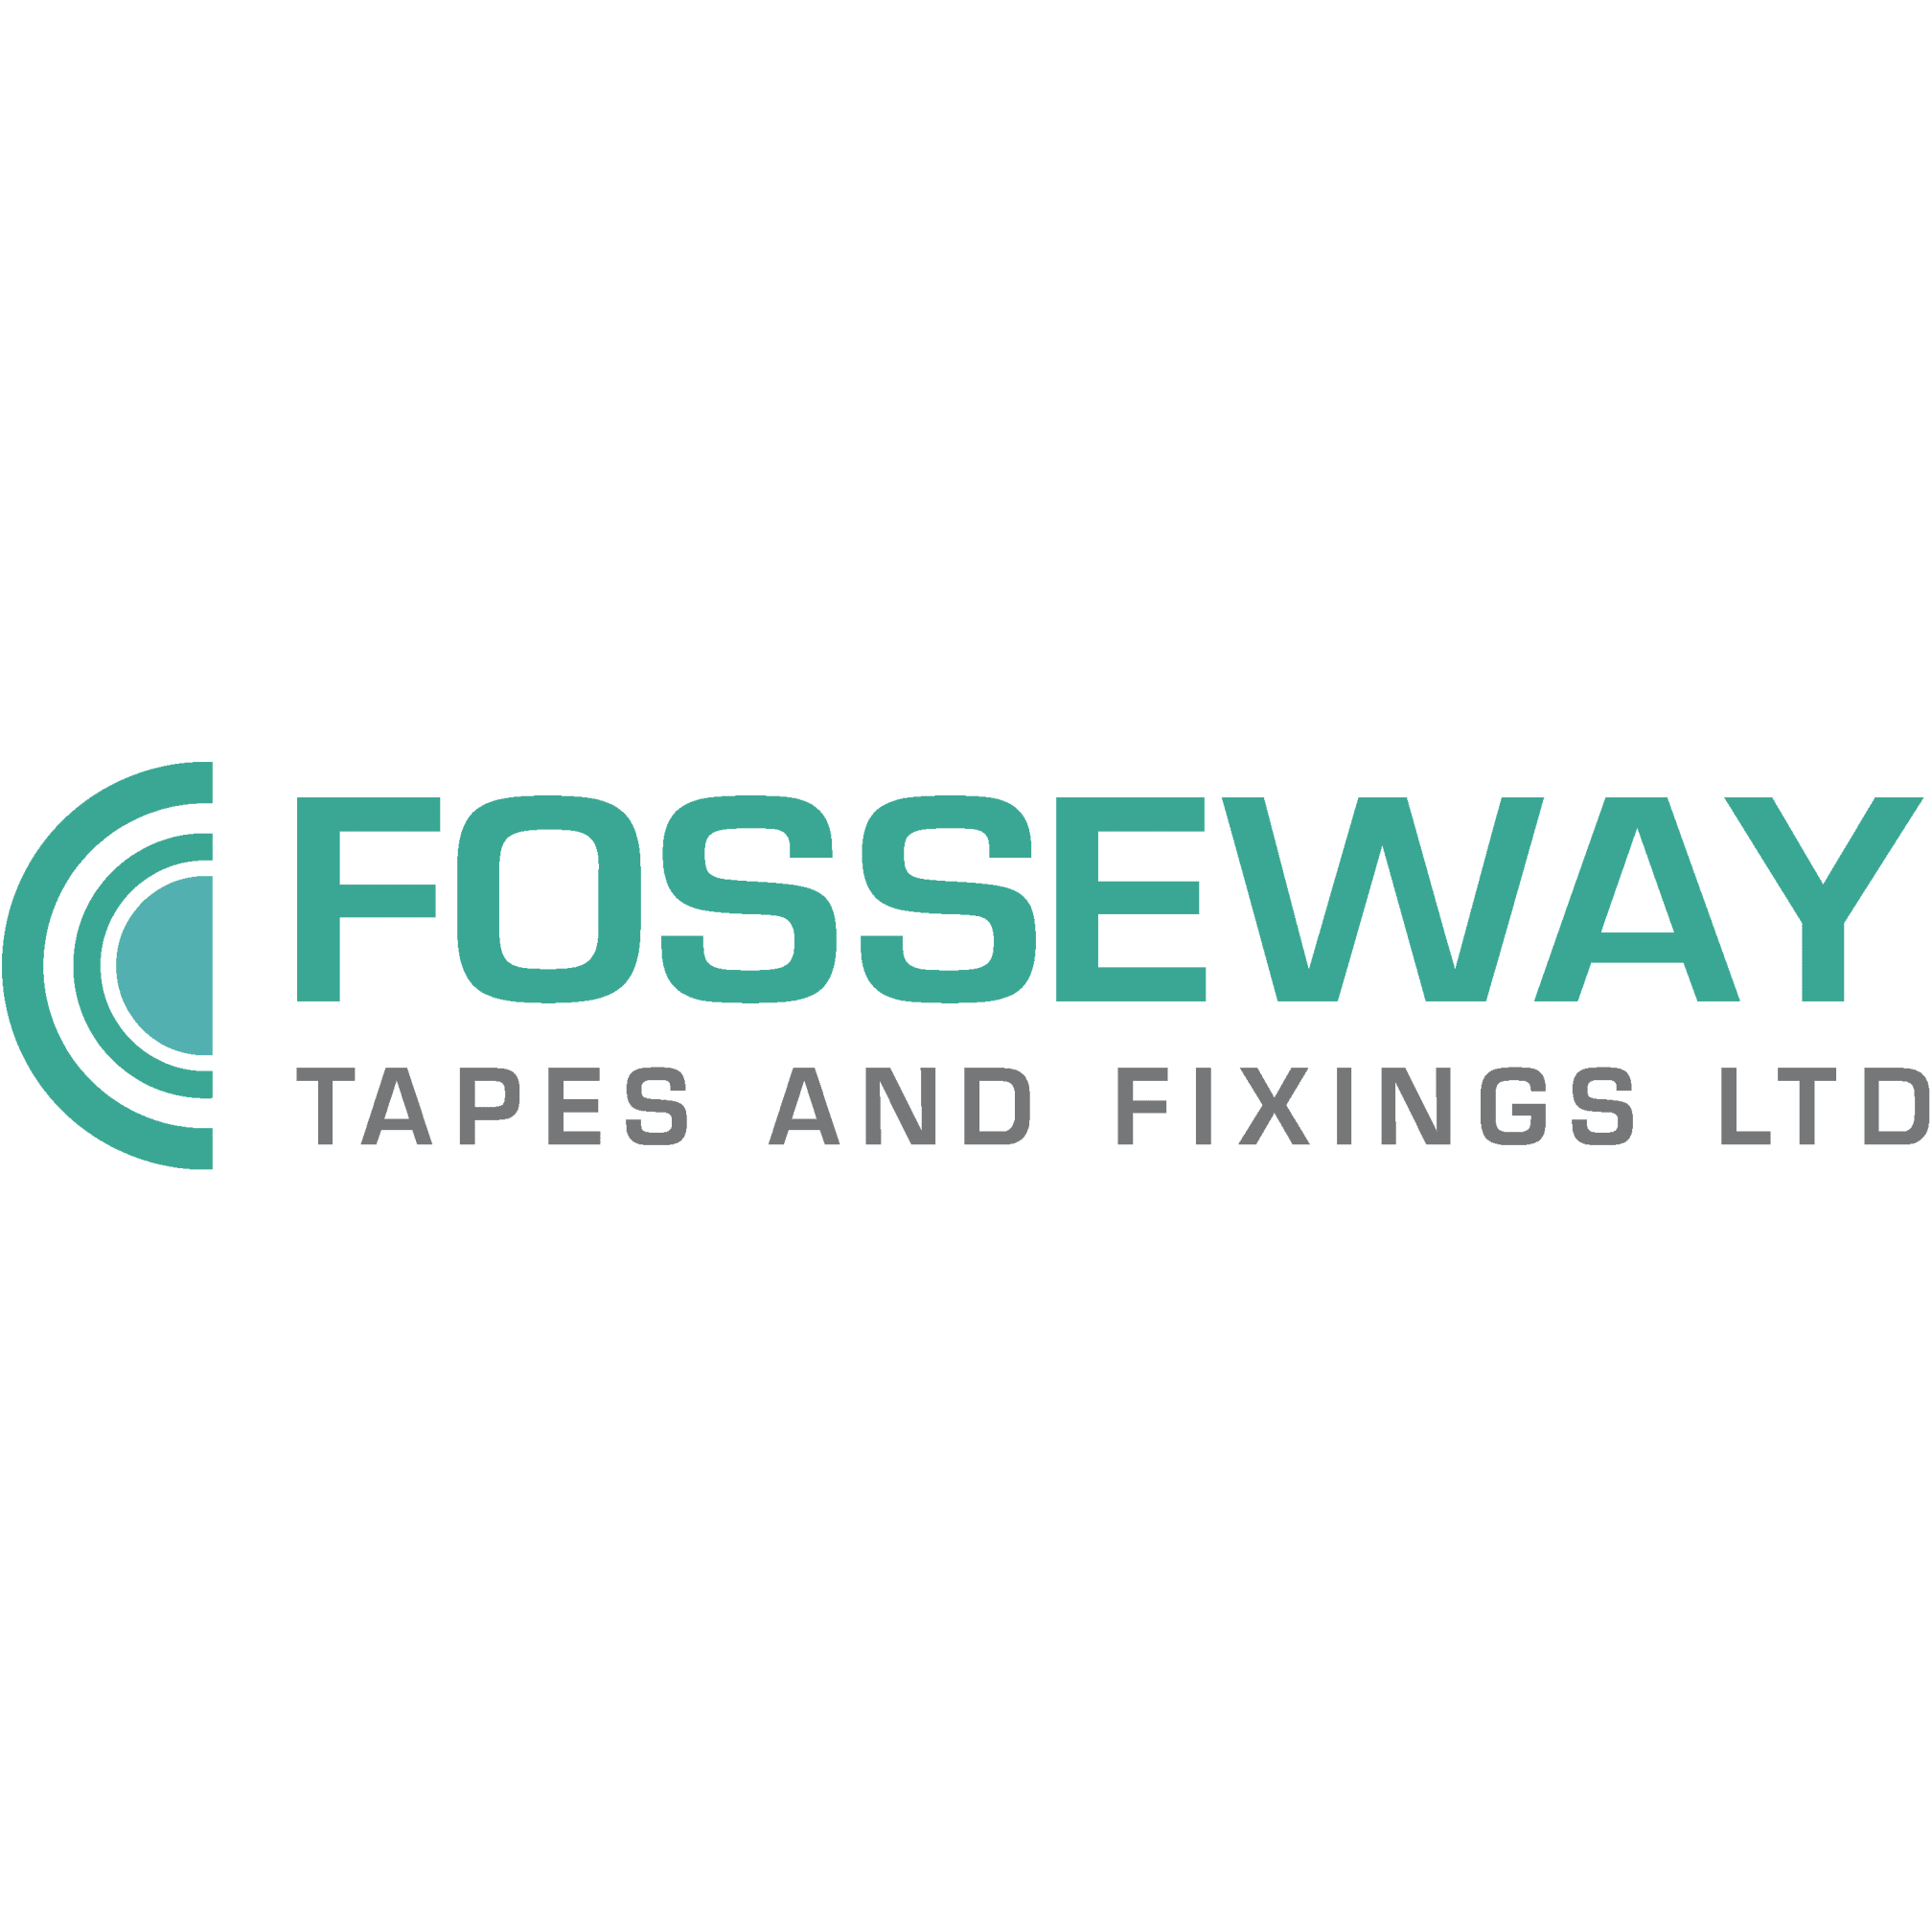 Fosseway Tapes & Fixings Ltd - Lutterworth, Leicestershire LE17 4HD - 01455 550515 | ShowMeLocal.com